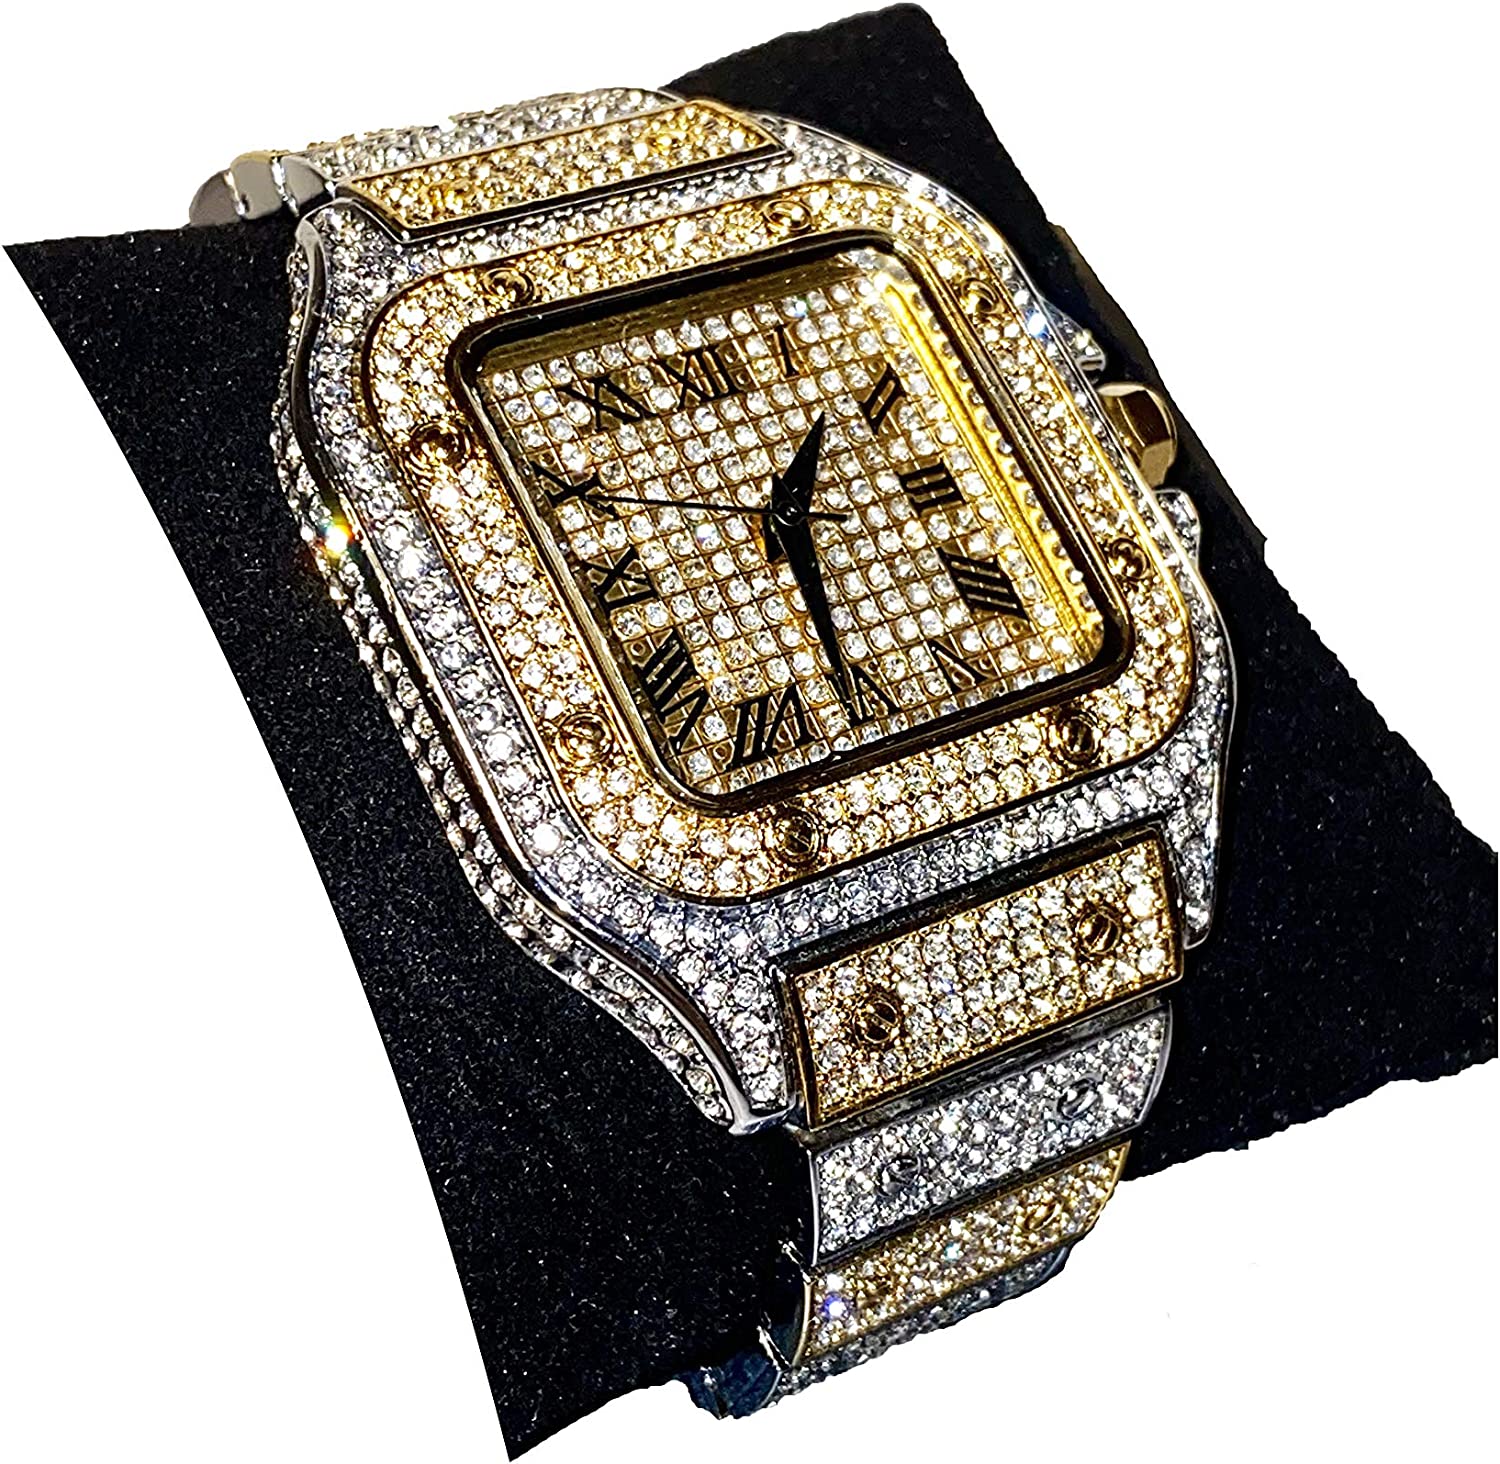 Men's Wrist Watch Band Luxury CZ Diamond Iced Out Watch Gold Roman Numeric Square Dial Watch For Men Women Hip Hop Rapper Choice, Men Watch, Mens Jewelry, Iced Watch Custom Fit, Bust Down Watch